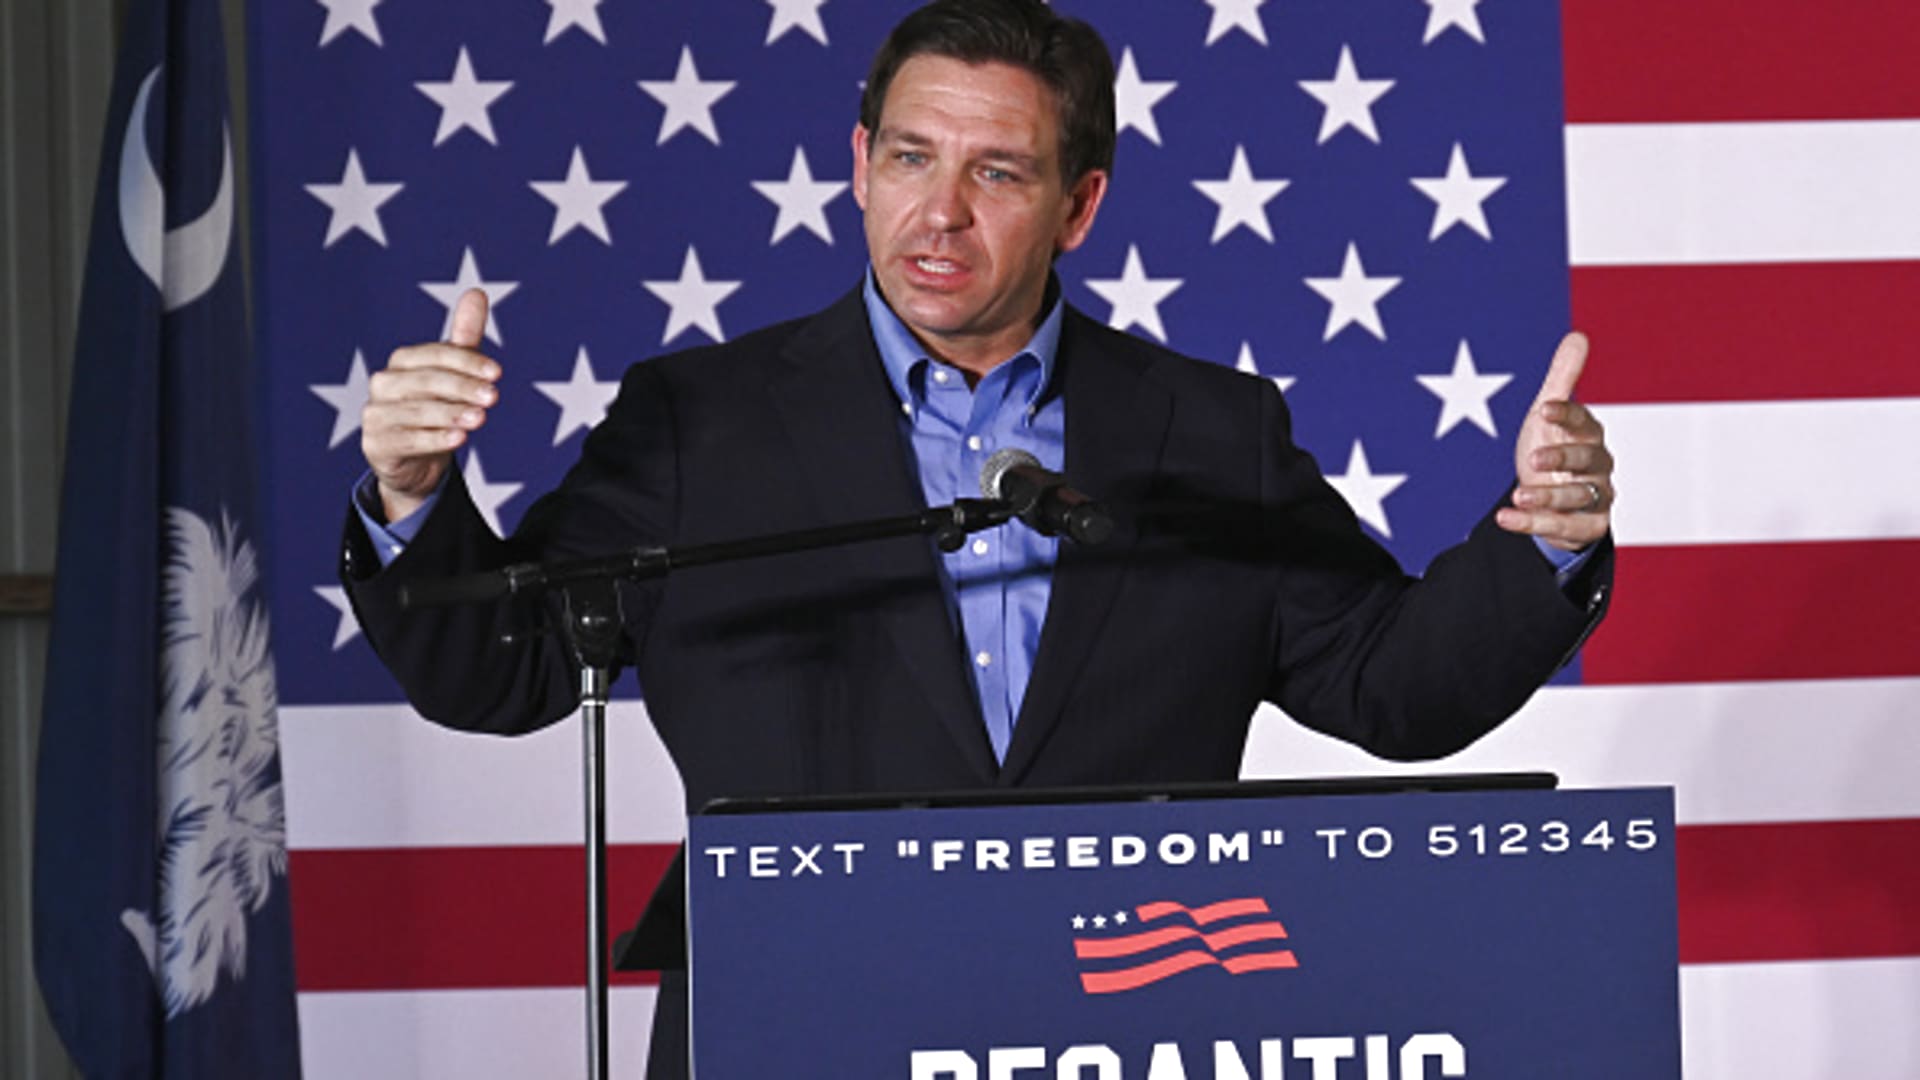 Fireside chat with Gov. Ron DeSantis and First Lady Casey DeSantis as part of the Our Great American Comeback campaign event in Lexington, SC, on June 02, 2023.